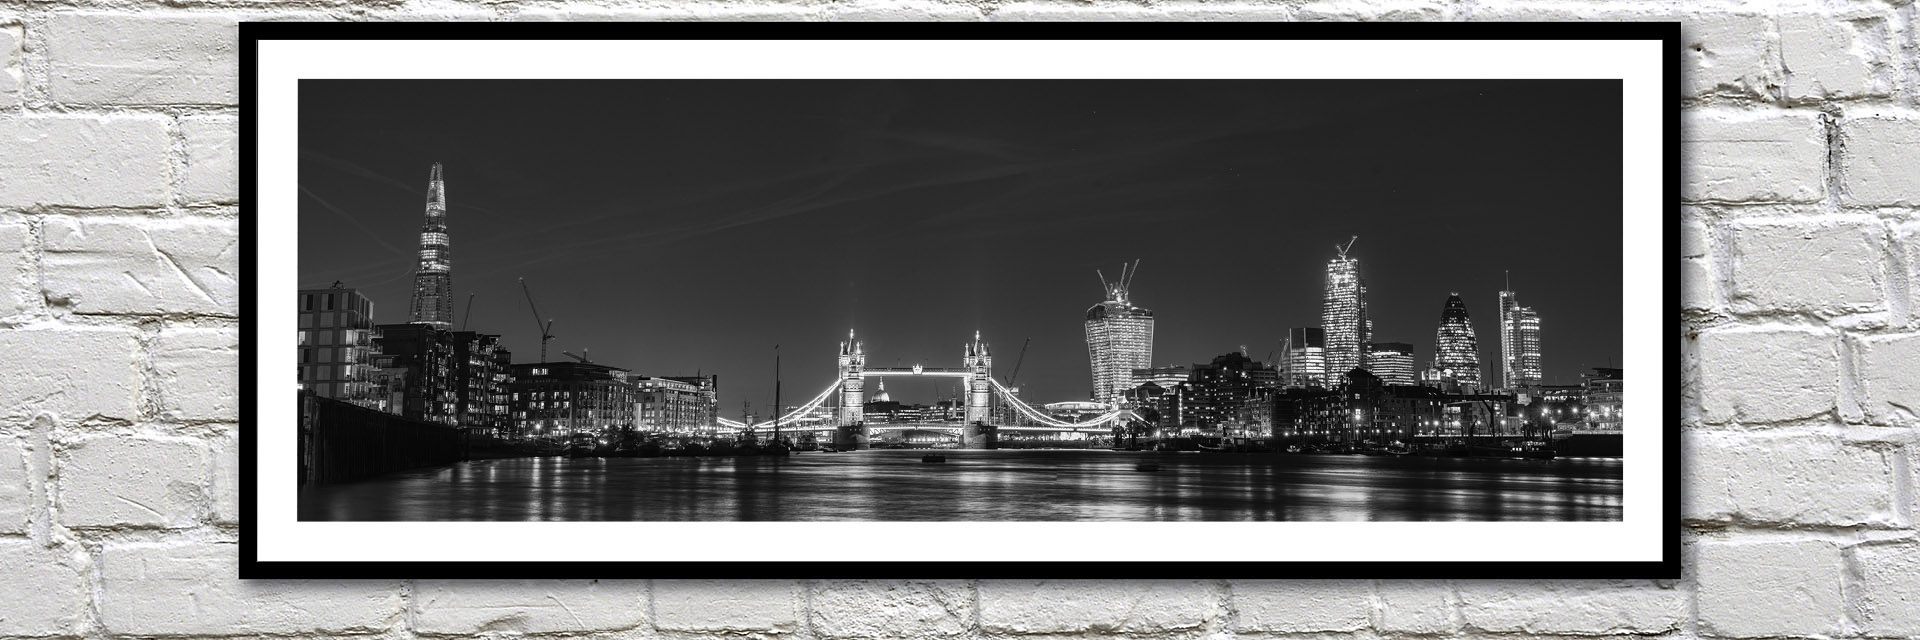 Office art ideas London black and white verticals